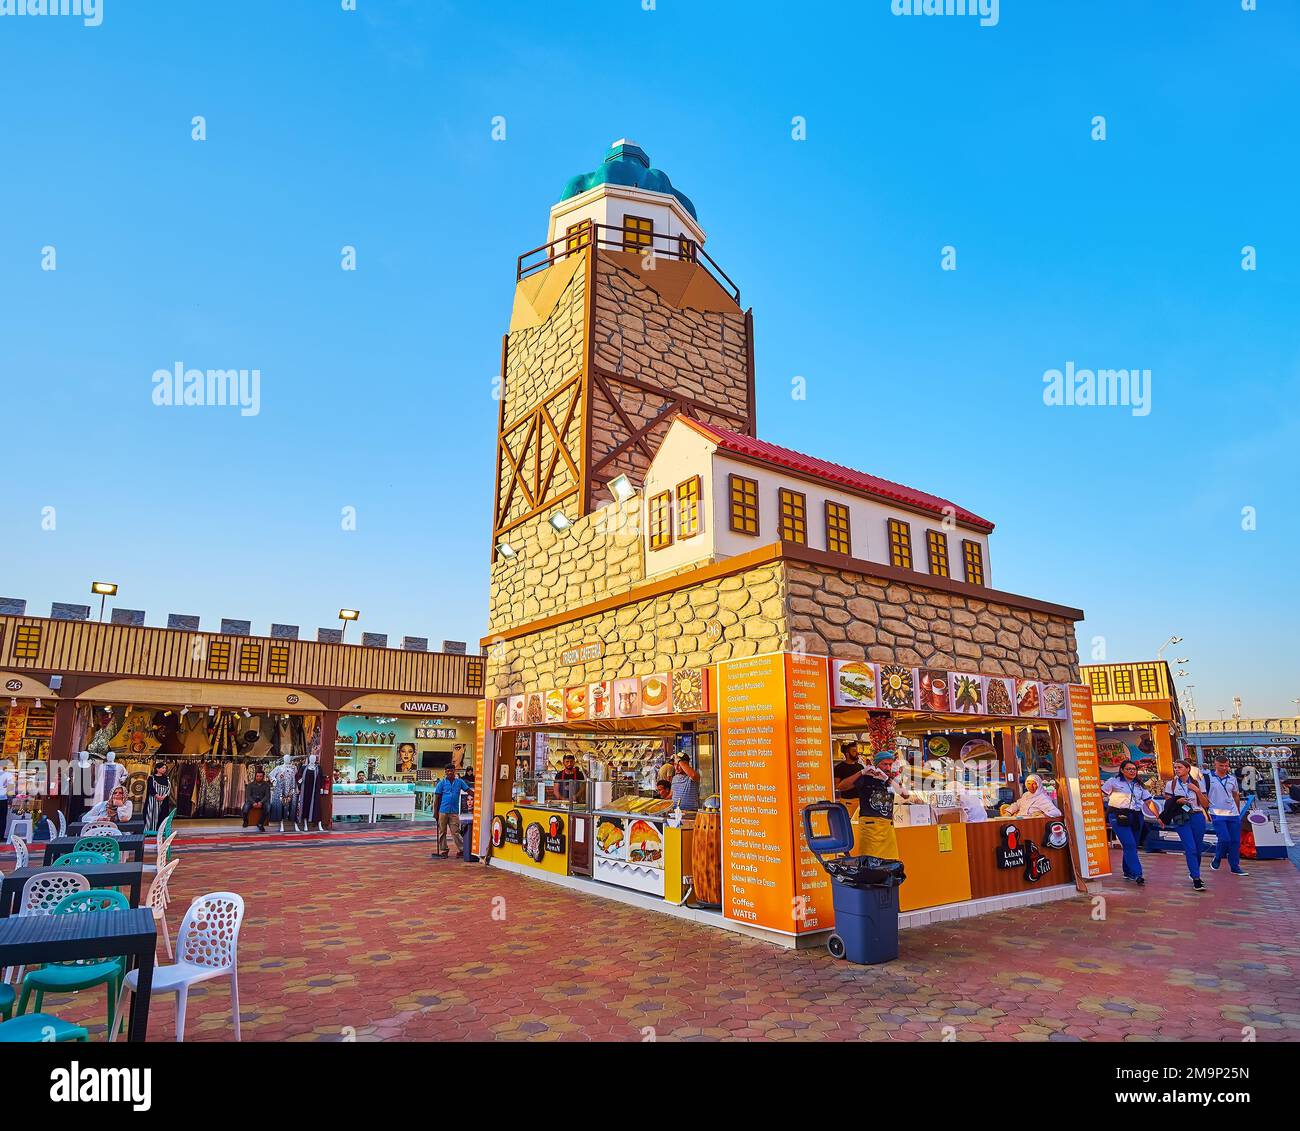 DUBAI, UAE - MARCH 6, 2020: Pavilion of Turkey in Global Village Dubai with food kiosks in Istanbul's Maiden Tower replica, located amid the small squ Stock Photo